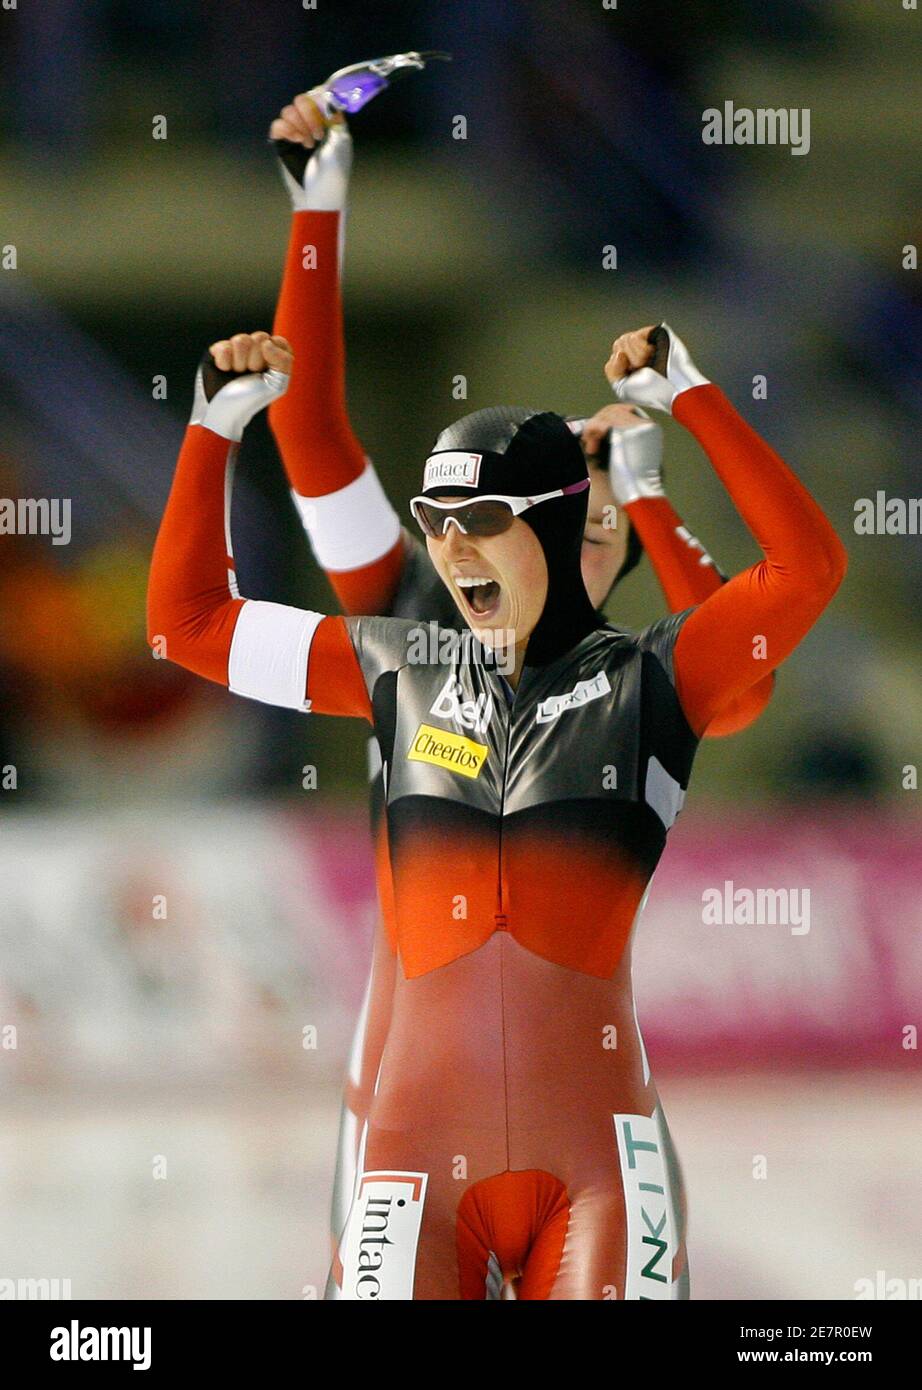 Brittany Schussler of Canada celebrates her new world record in the ladies team pursuit event during the ISU World Cup speed skating race in Calgary, Alberta, December 6, 2009. REUTERS/Todd Korol  (CANADA SPORT SPEED SKATING) Stock Photo